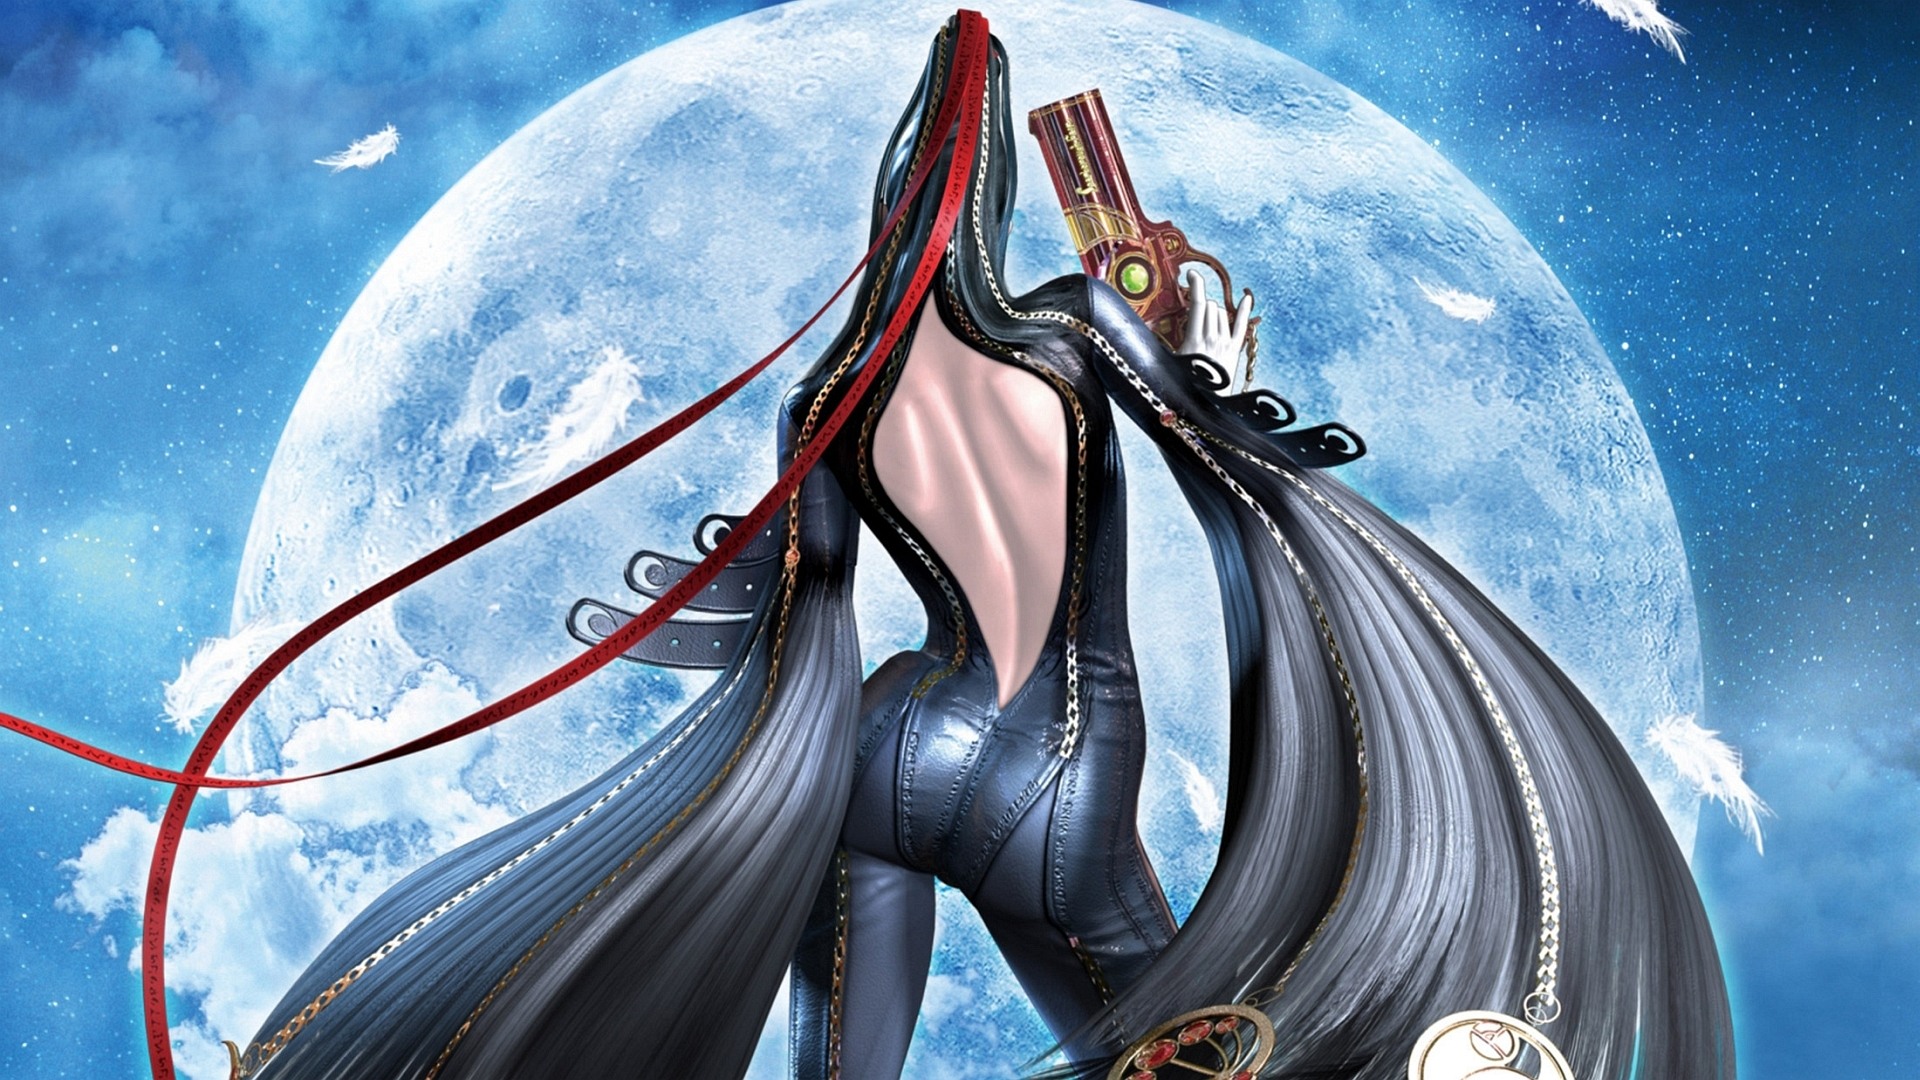 Bayonetta Backgrounds, Compatible - PC, Mobile, Gadgets| 1920x1080 px